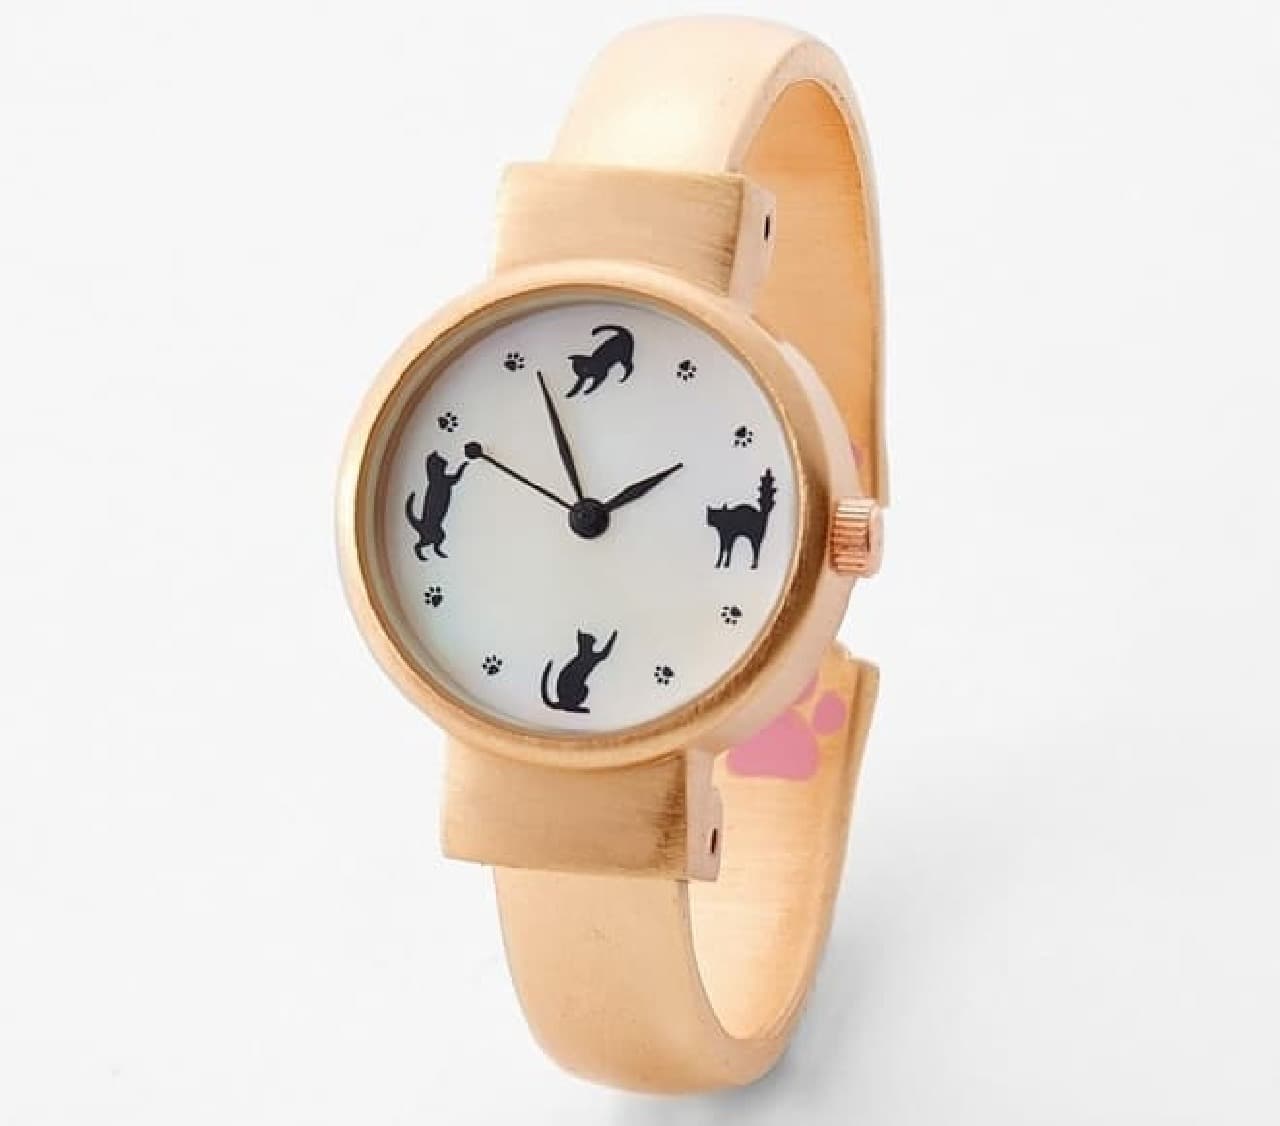 "Gyutto hug Nyan cat technique bangle watch" Pink gold with a small face